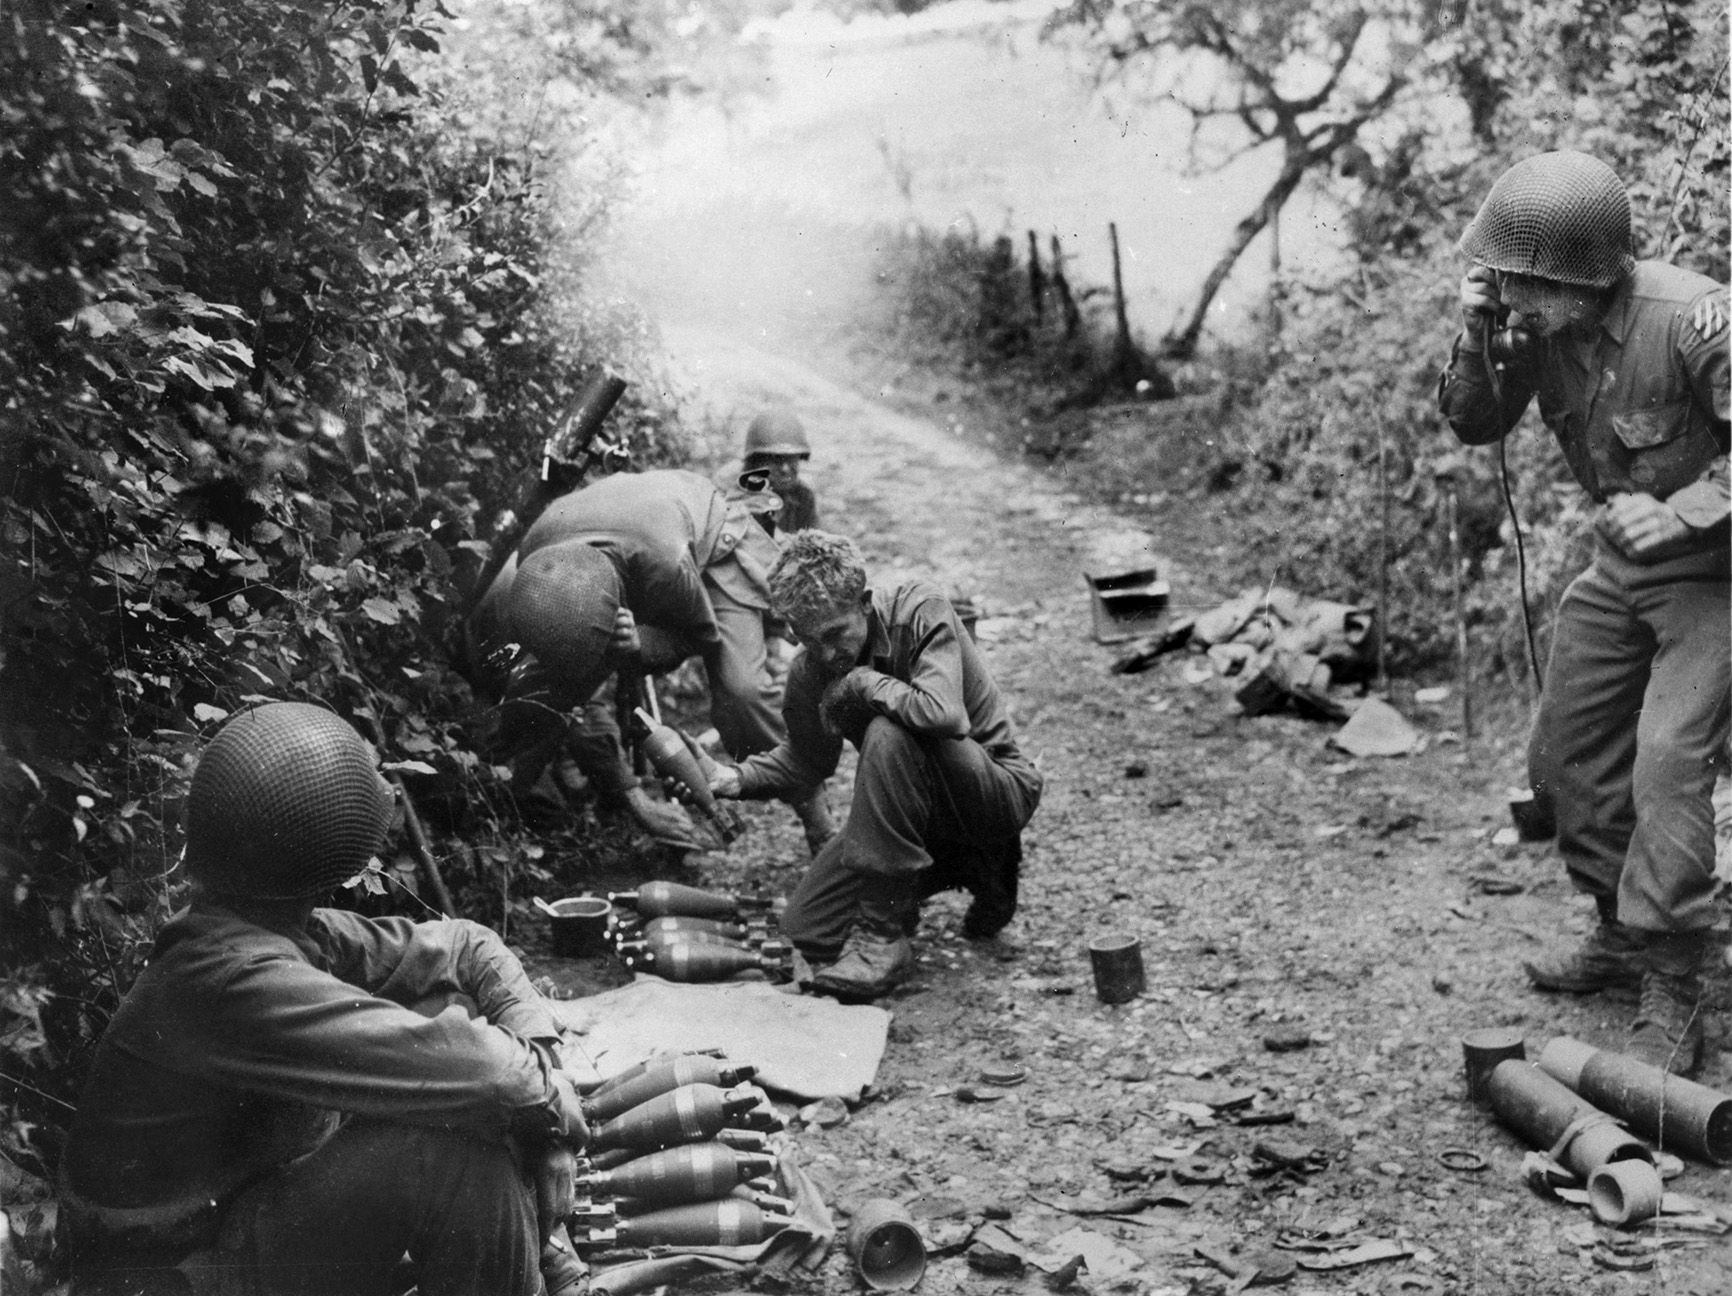 On September 9, 1944, a 3rd Division mortar squad blasts the enemy near the Swiss border in the Rigney, France, area. The Germans made a furious stand to keep the Americans from entering Germany.